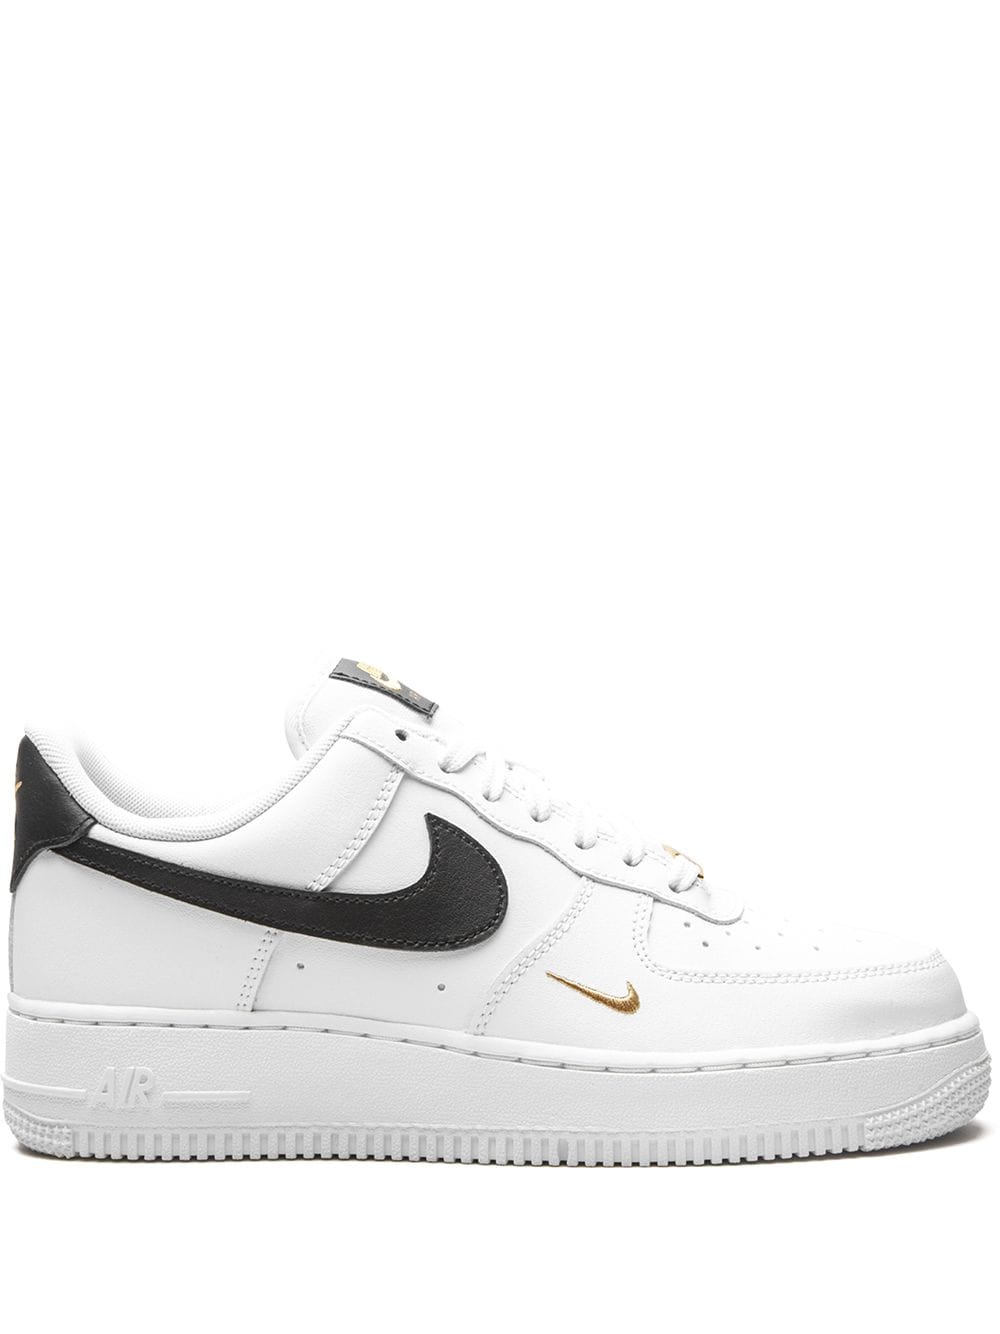 Nike Air Force 1 Low Essential "White/Black/Gold" sneakers von Nike